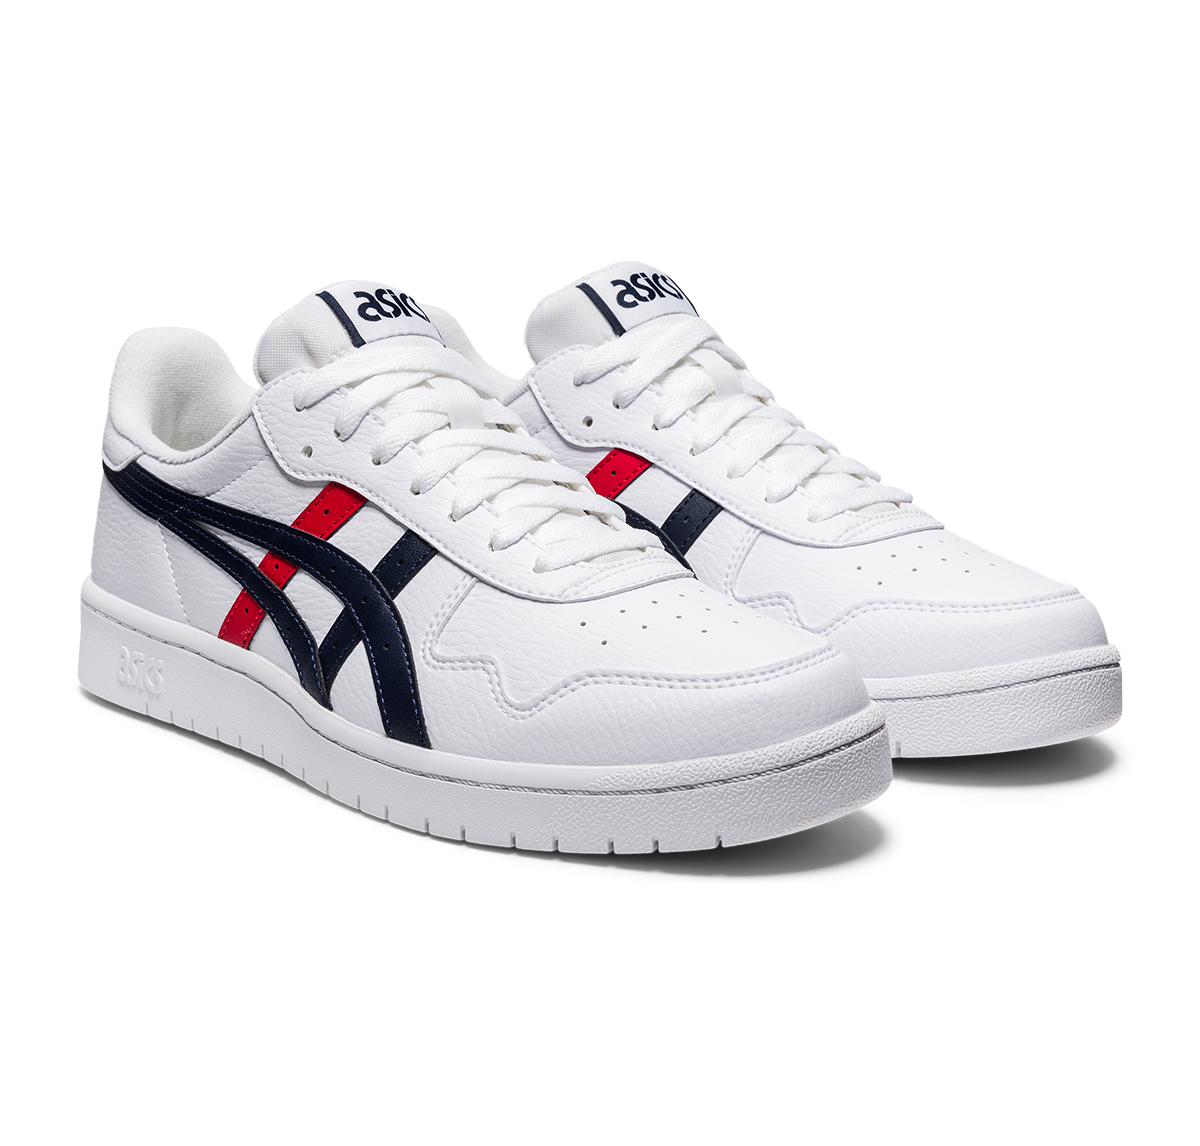 ASICS Japan S - White Navy front view